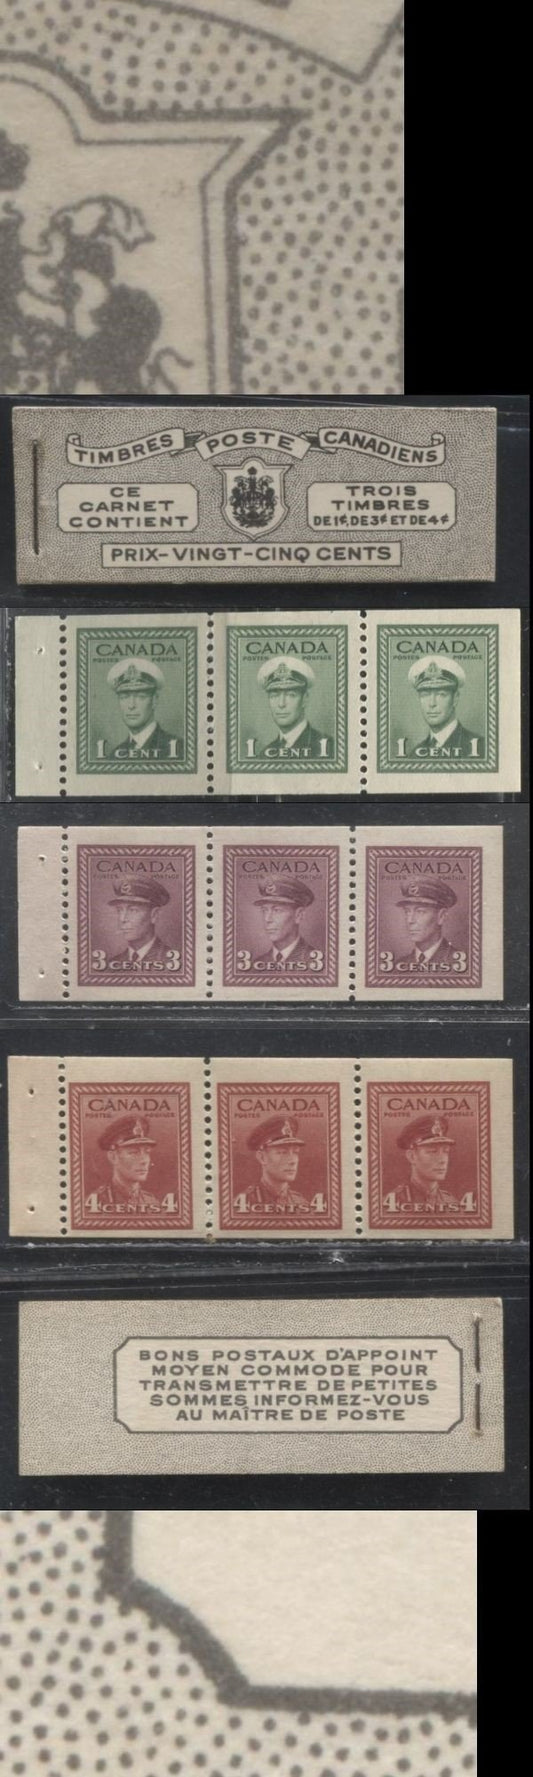 Lot 206 Canada #BK38a 1942-1949 War Issue Complete 25c, French Booklet Containing 1 Pane Each of 3 of 1c Green, 3c Rosy Plum and 4c Carmine Red, Harris Front Cover Type Vd , Back Cover Jiii, 7c & 6c Rate Page